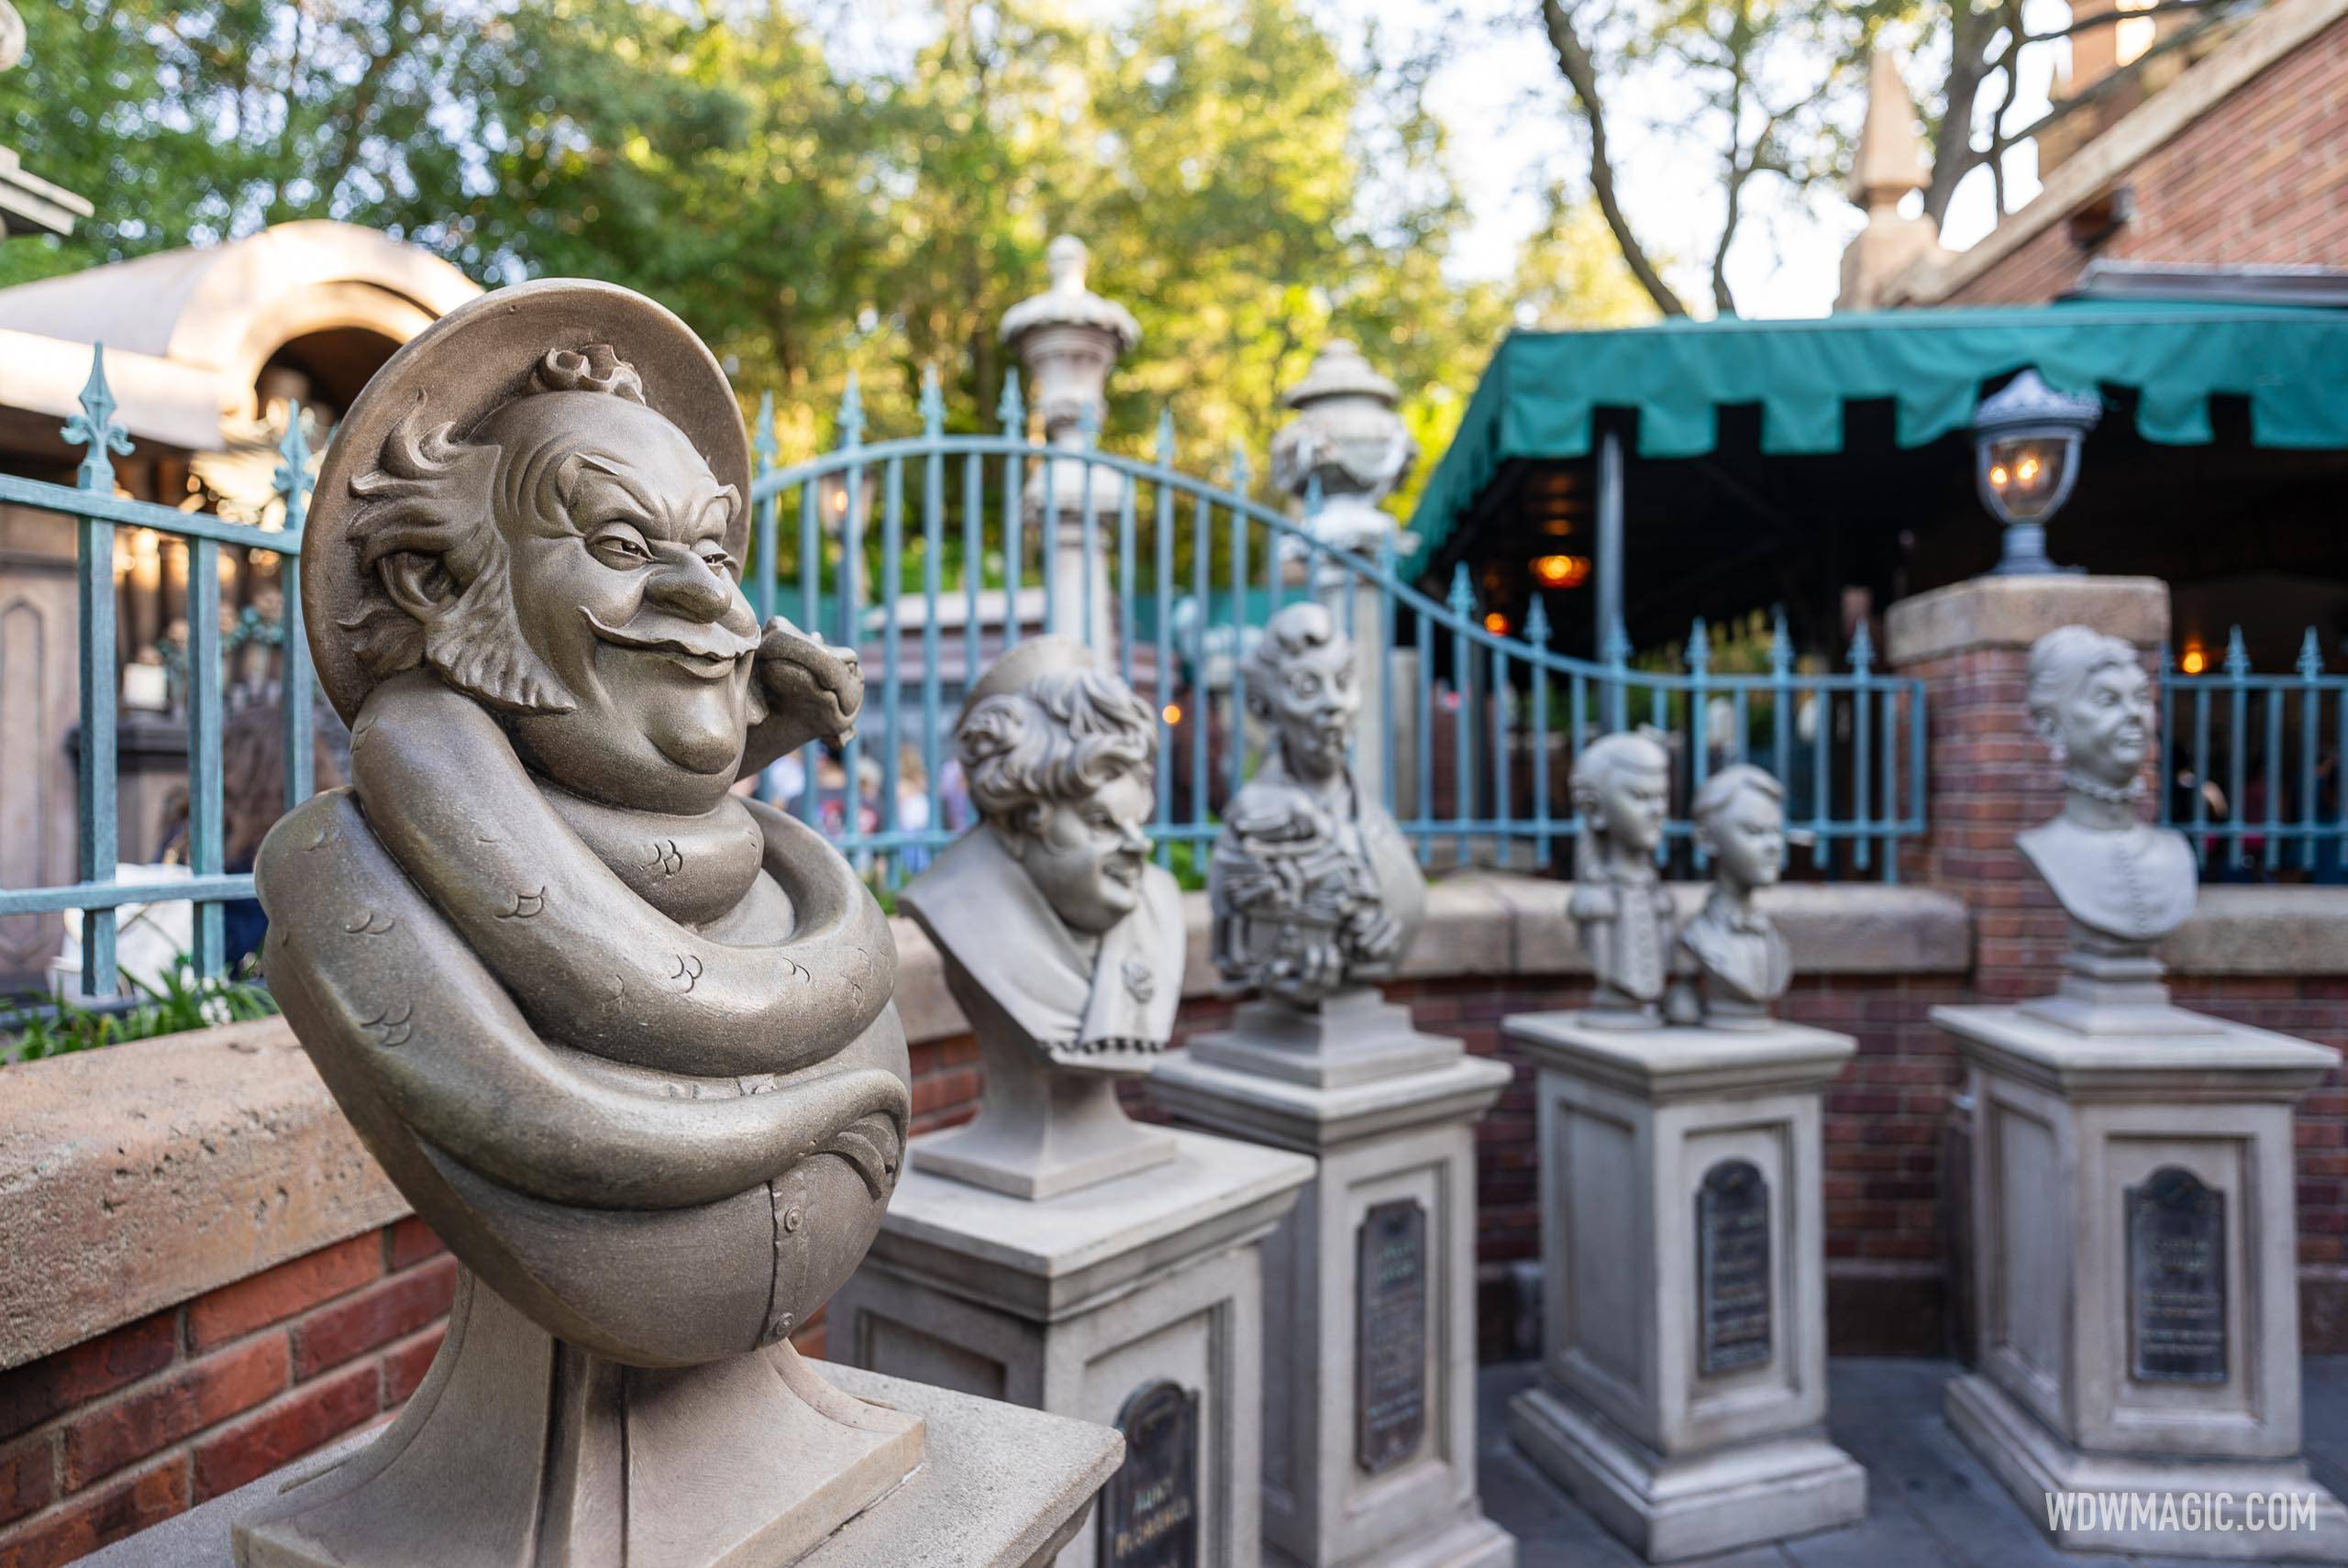 The Haunted Mansion closing for refurbishment in December